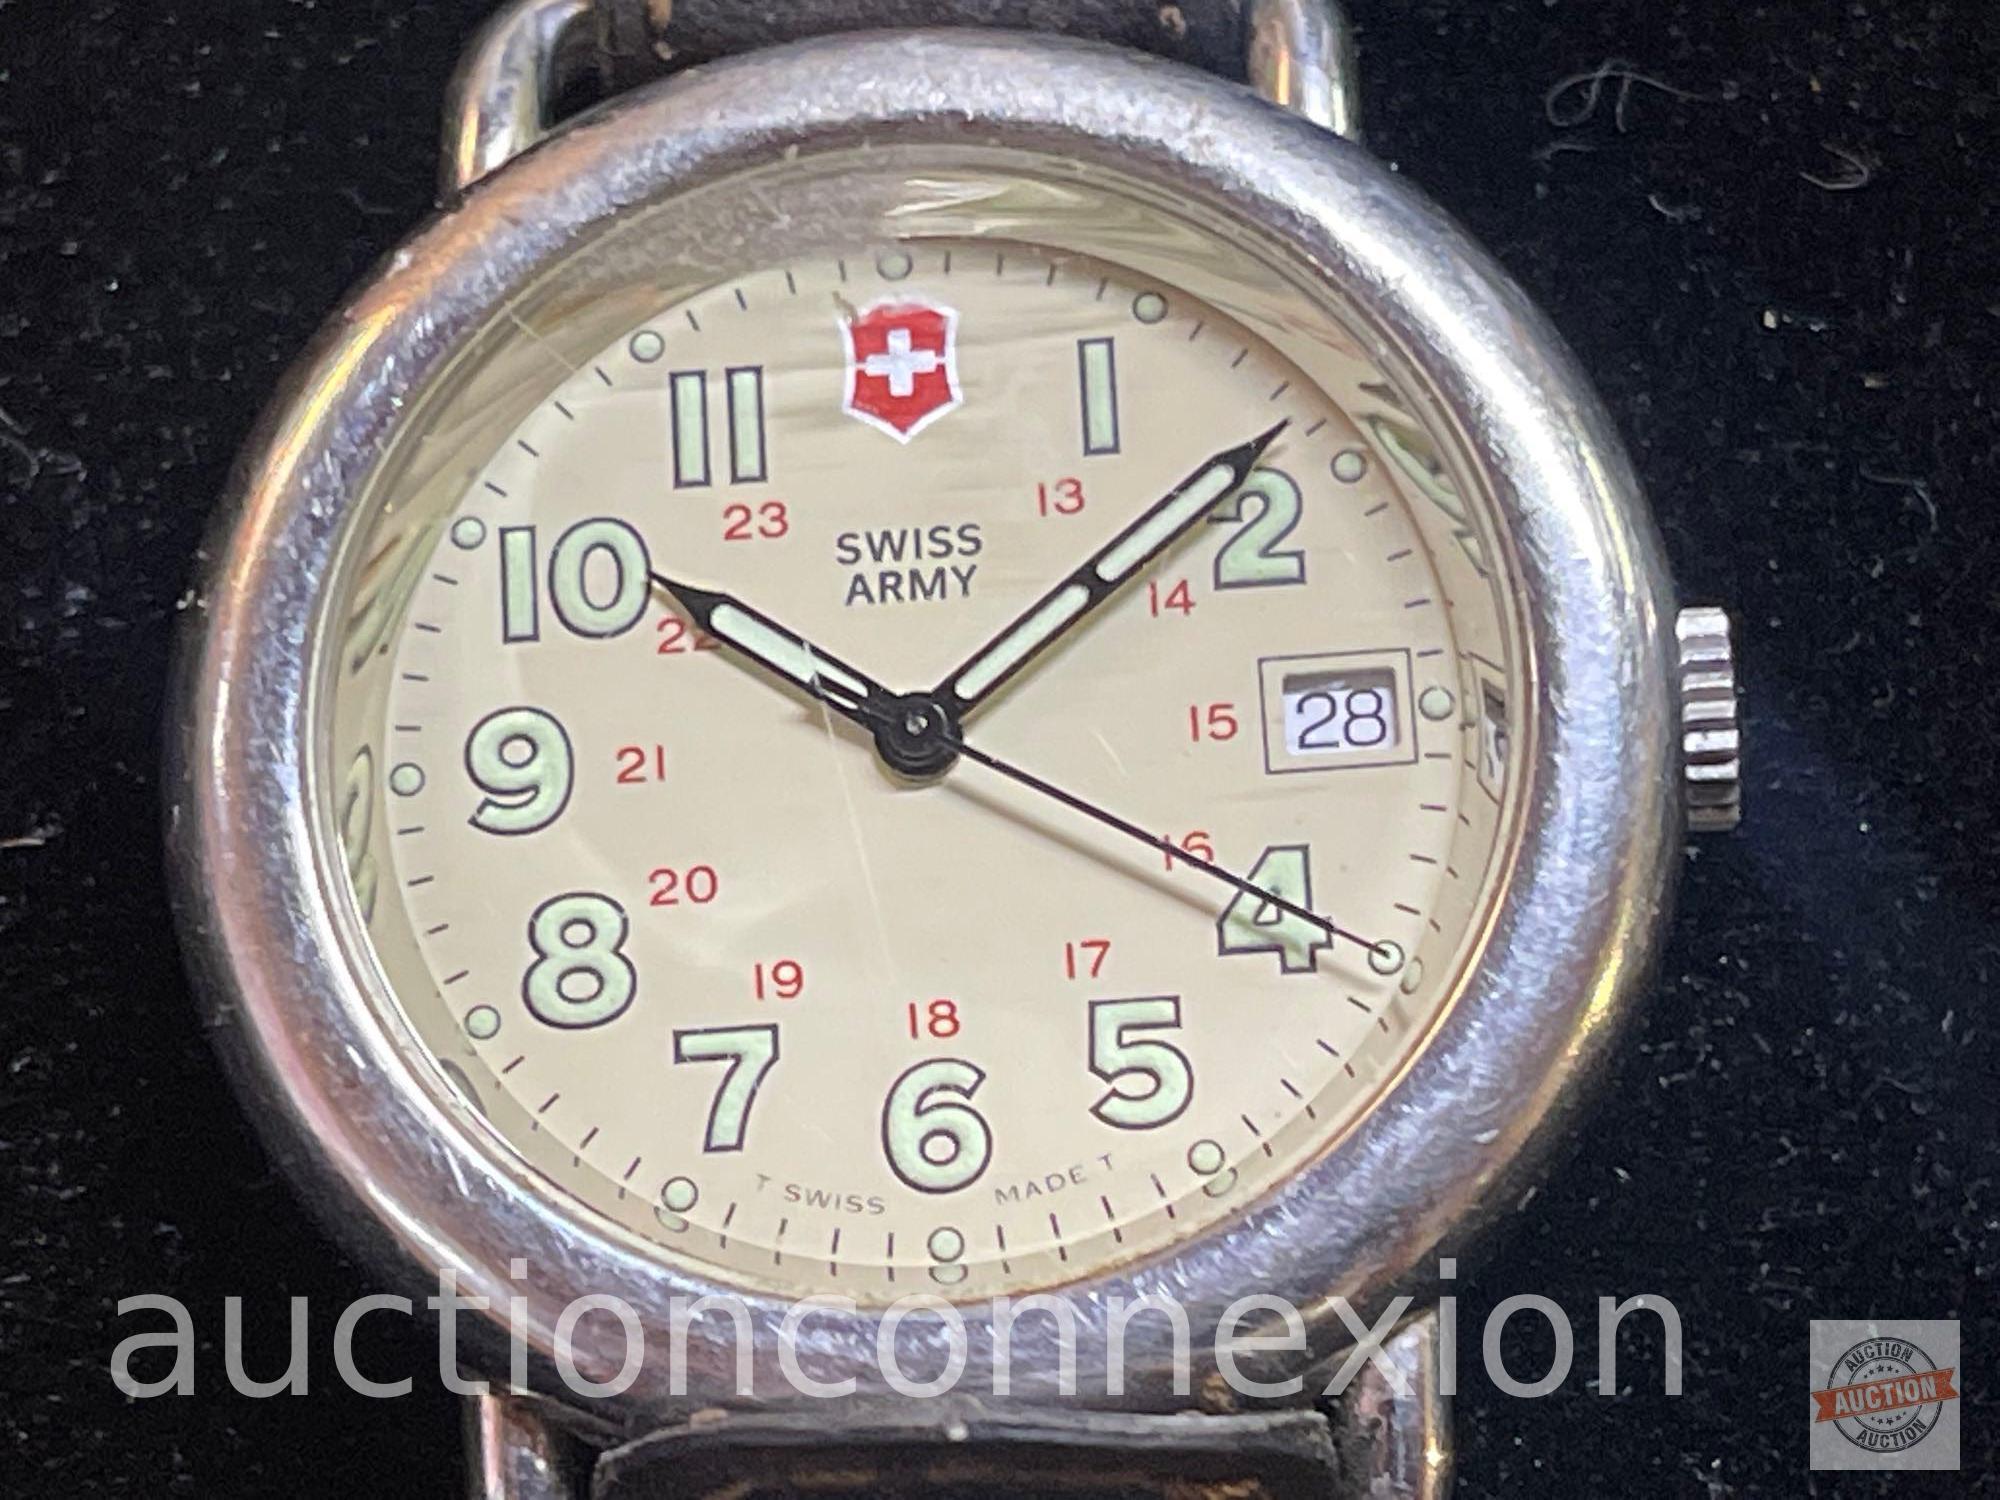 Jewelry - Men's wrist watch, Swiss Army, date/time, indiglo numerals and hands, leather band, no cla